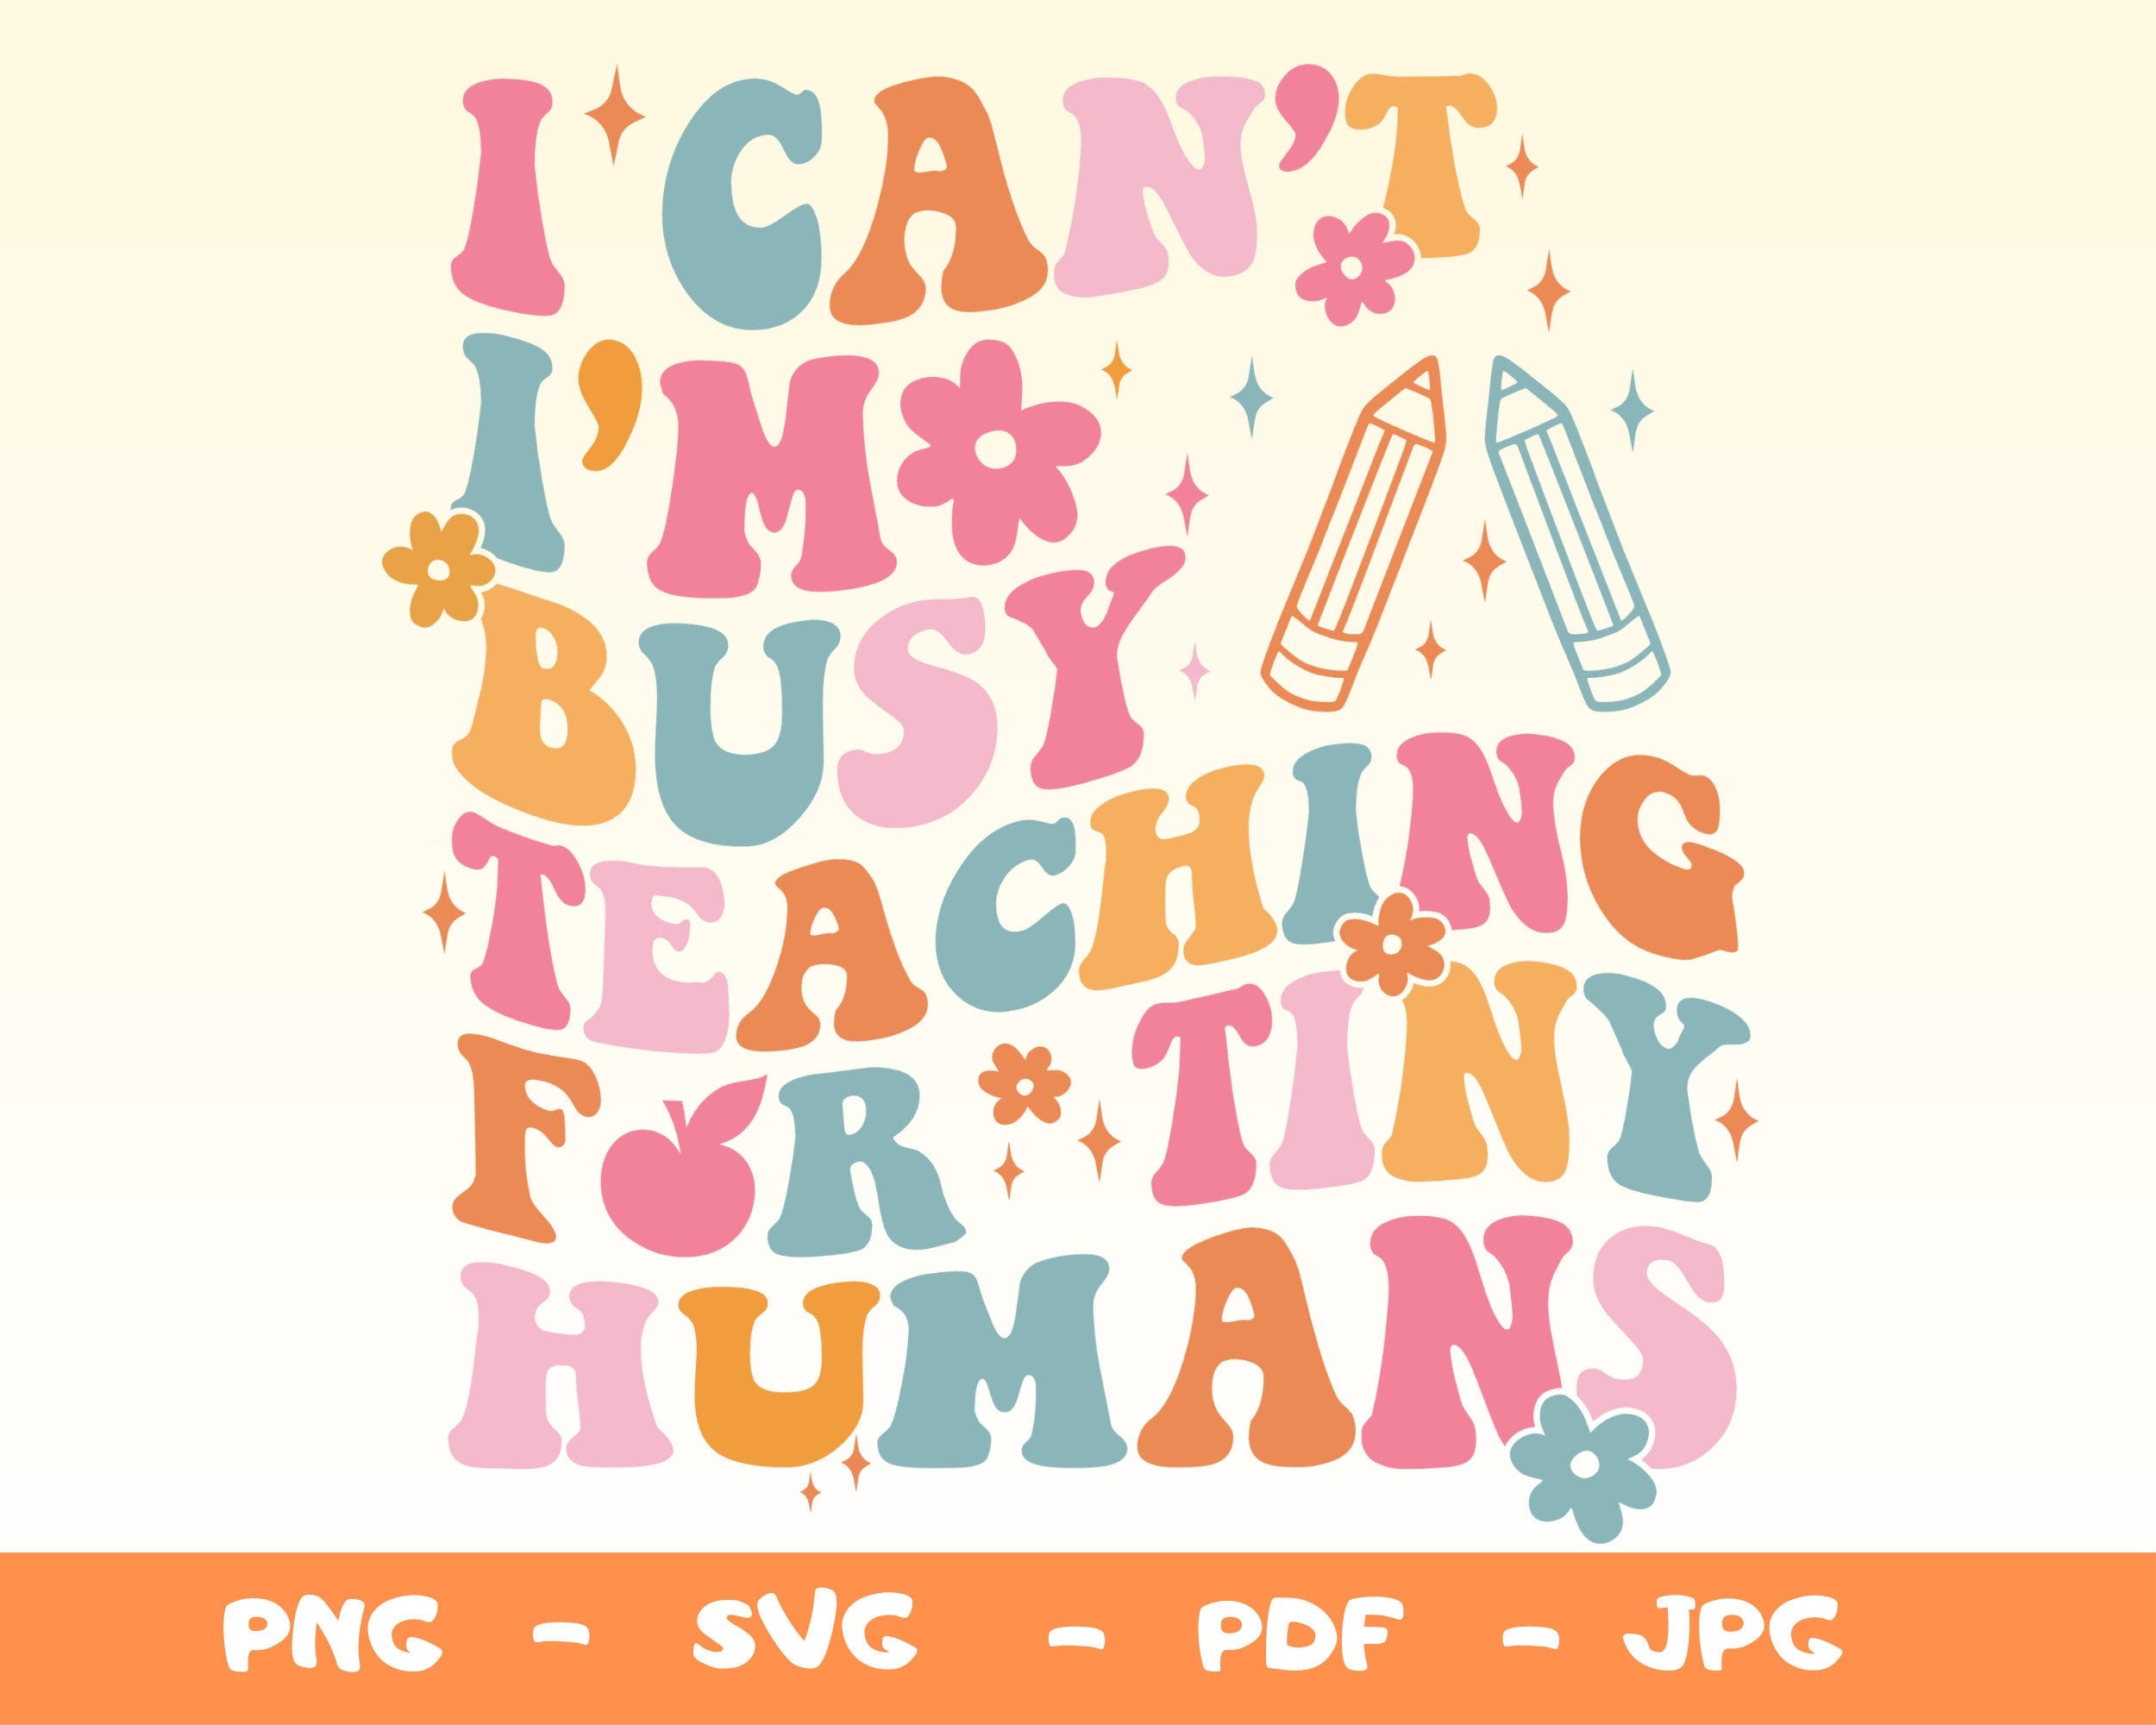 I Can’t I’m Busy Teaching Tiny Humans Svg,Png,Teach Tiny Humans Svg,Teacher Png,Teacher Appreciation Gift Svg,Elementary Teacher Png